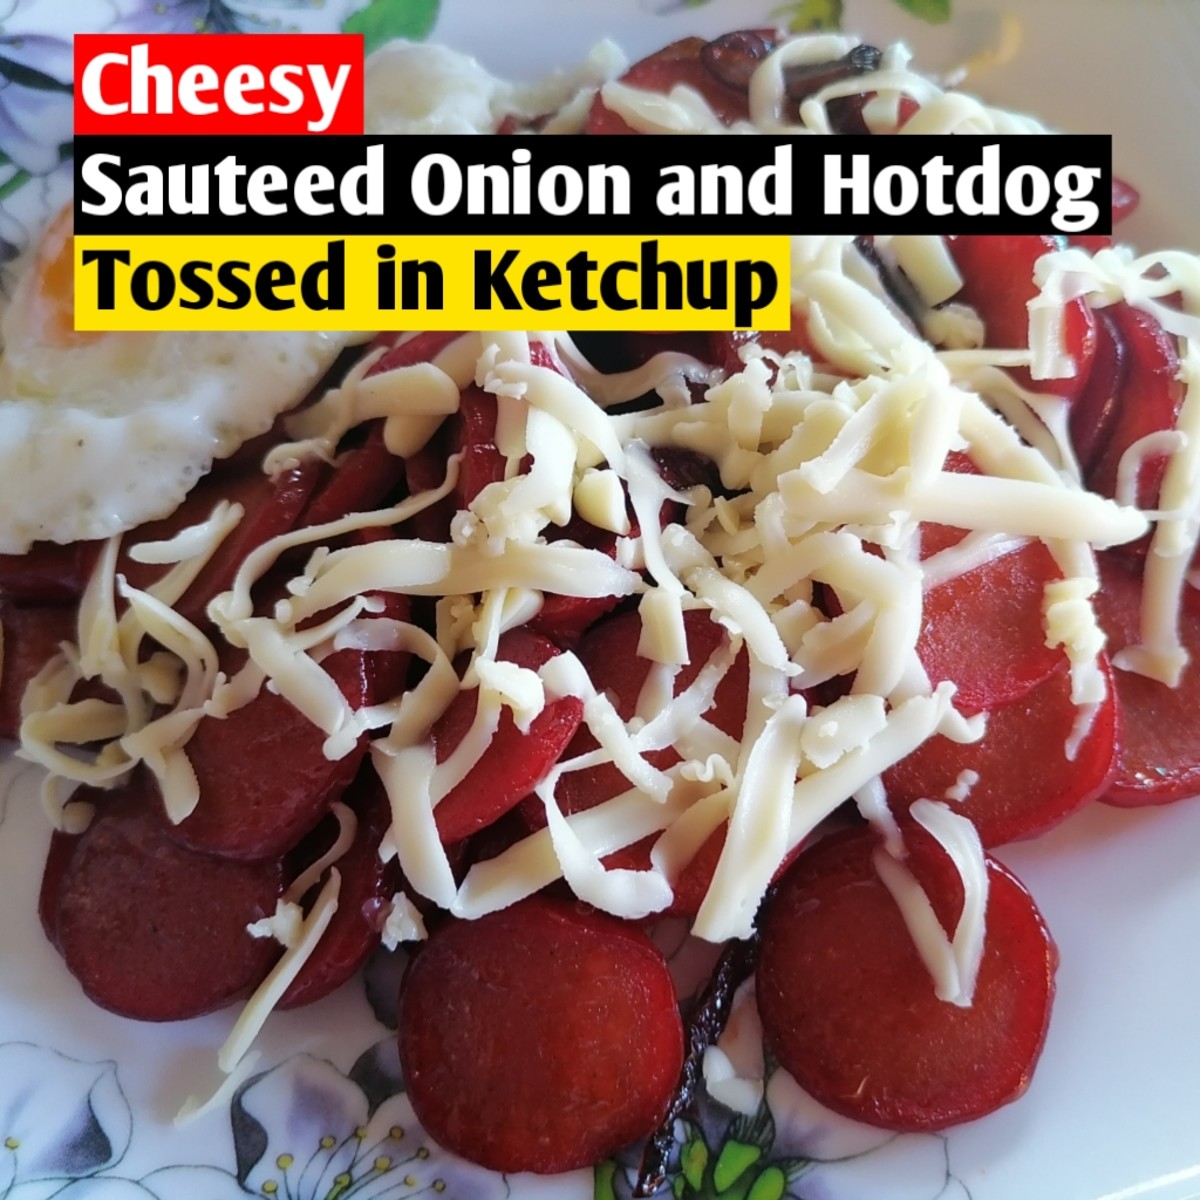 Cheesy Hot Dog With Sauteed Onion and Ketchup